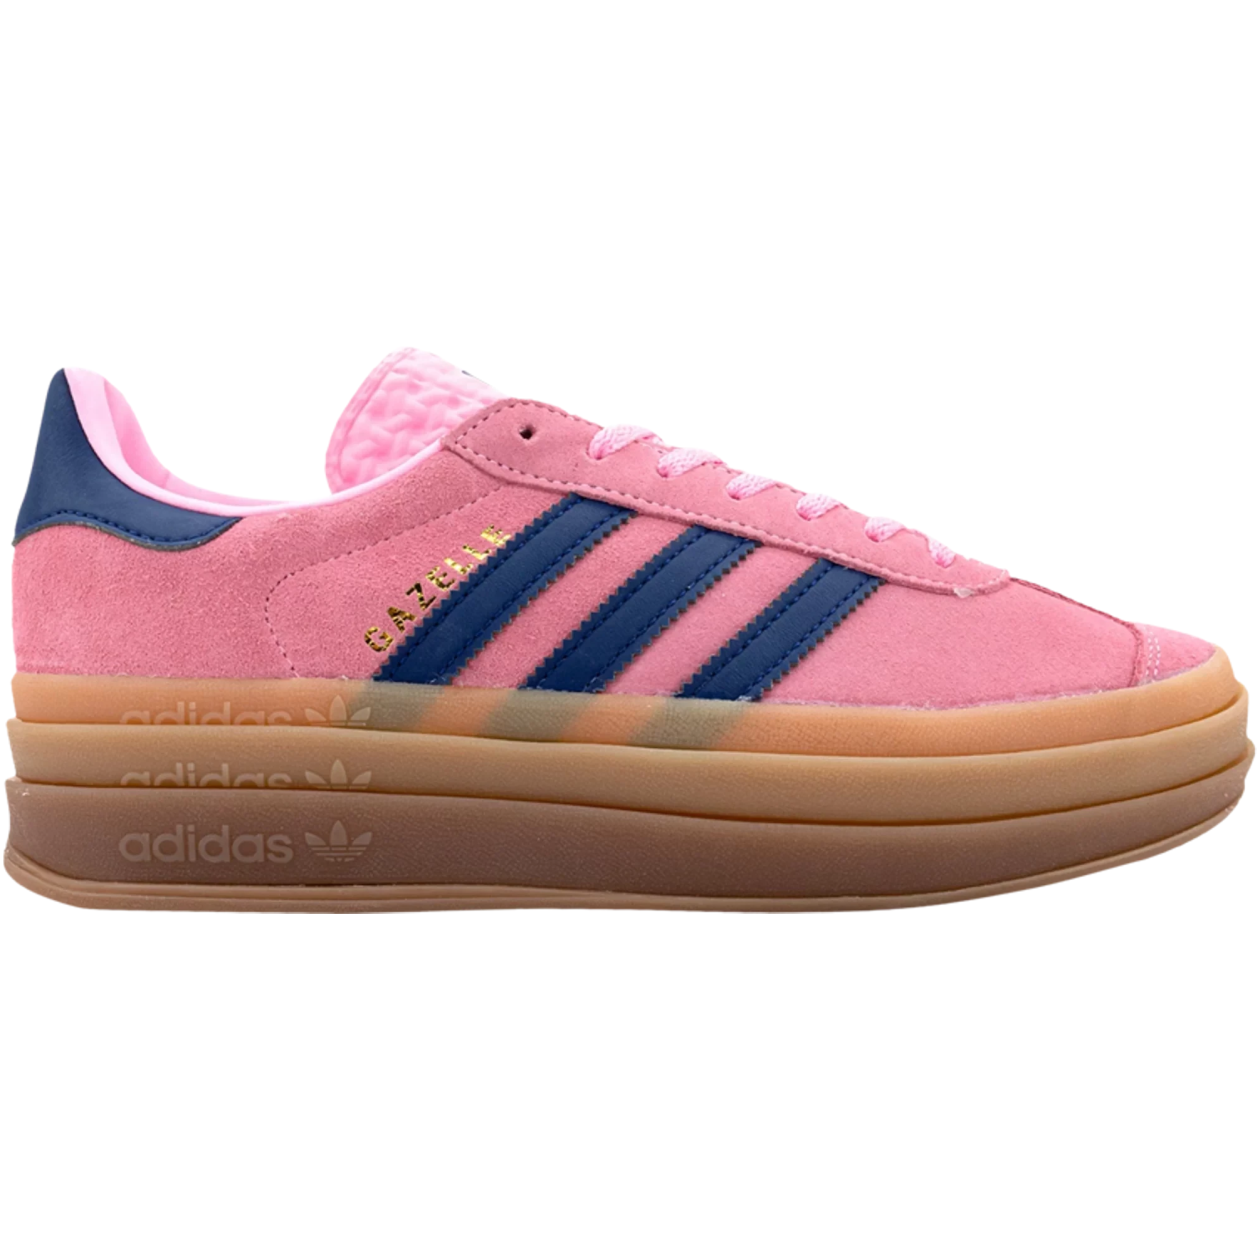 Adidas Gazelle Bold Pink Glow Gum Sneakers Joint